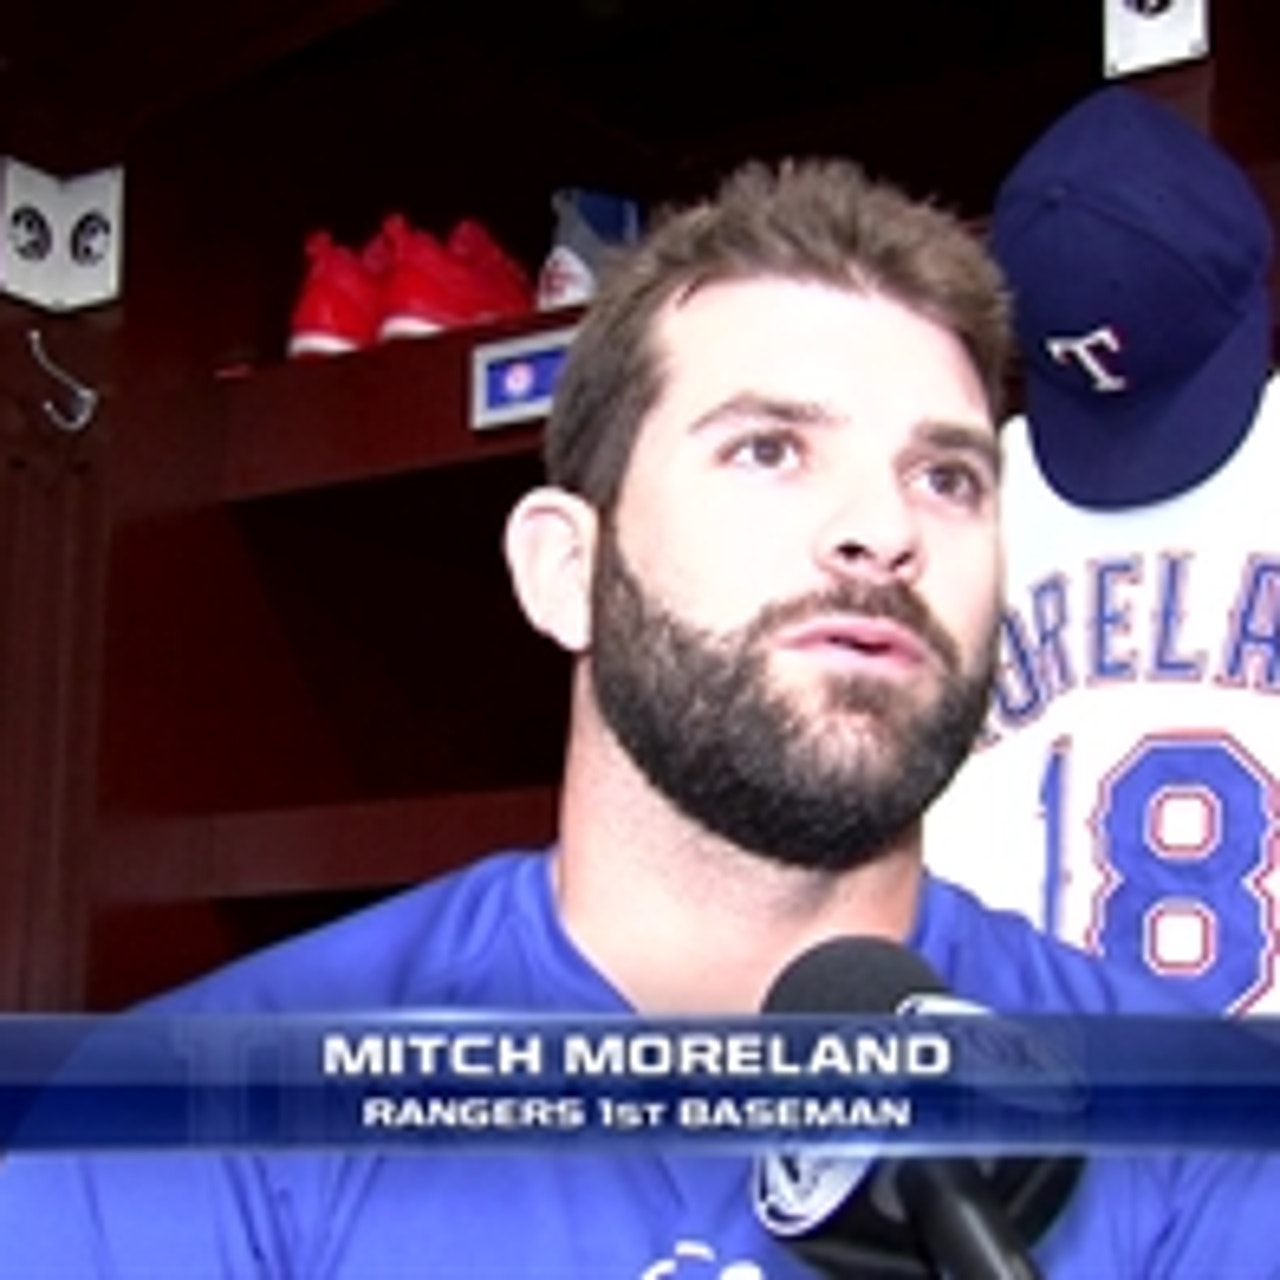 Rangers Insider: Mitch Moreland on and off the field